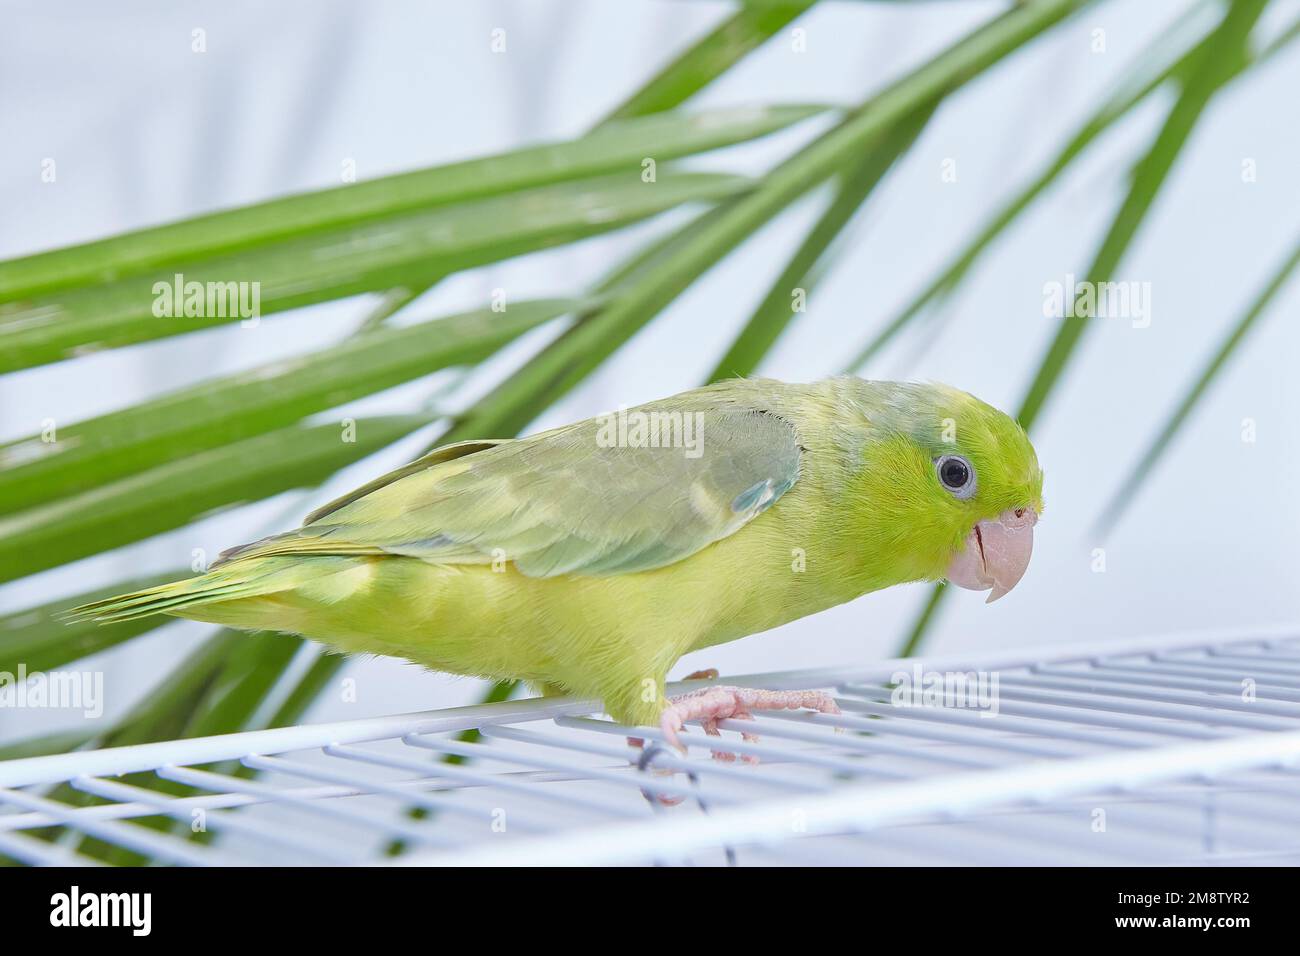 Forpus green, caged parrot with a green palm tree in the background. Stock Photo